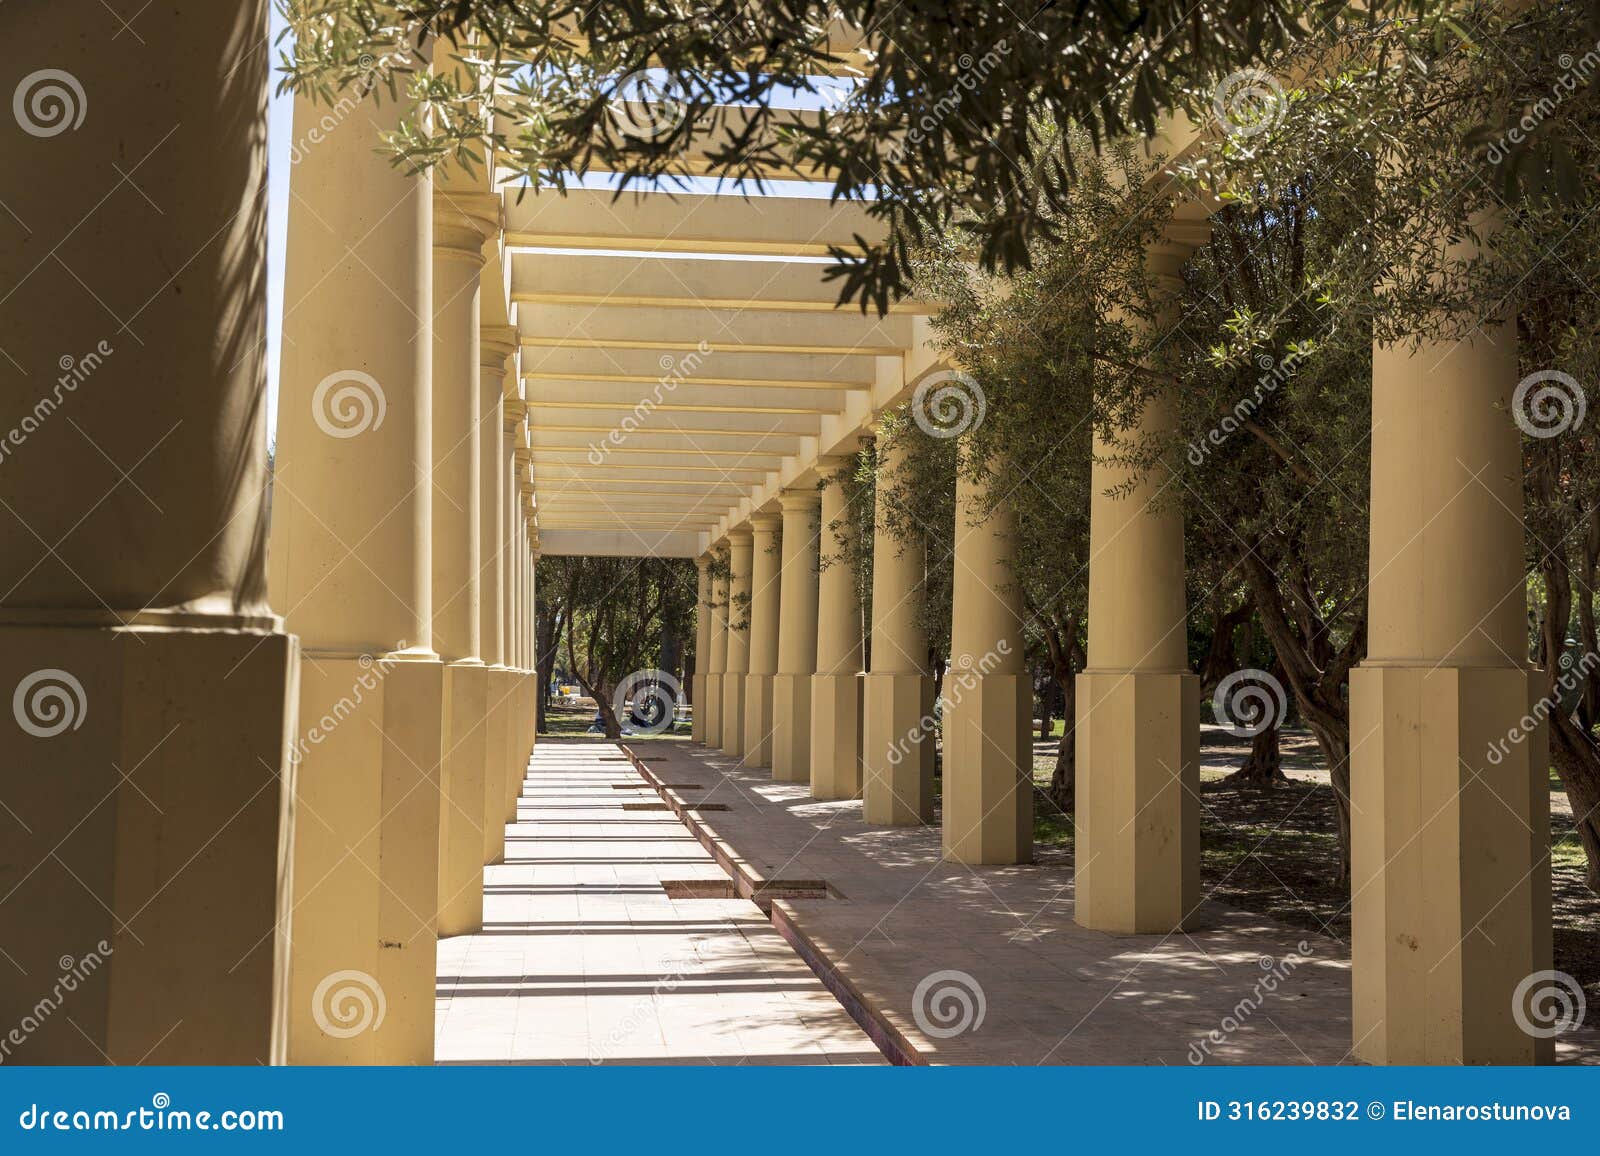 arcade situated within the jardins del turia gardens in valencia, spain